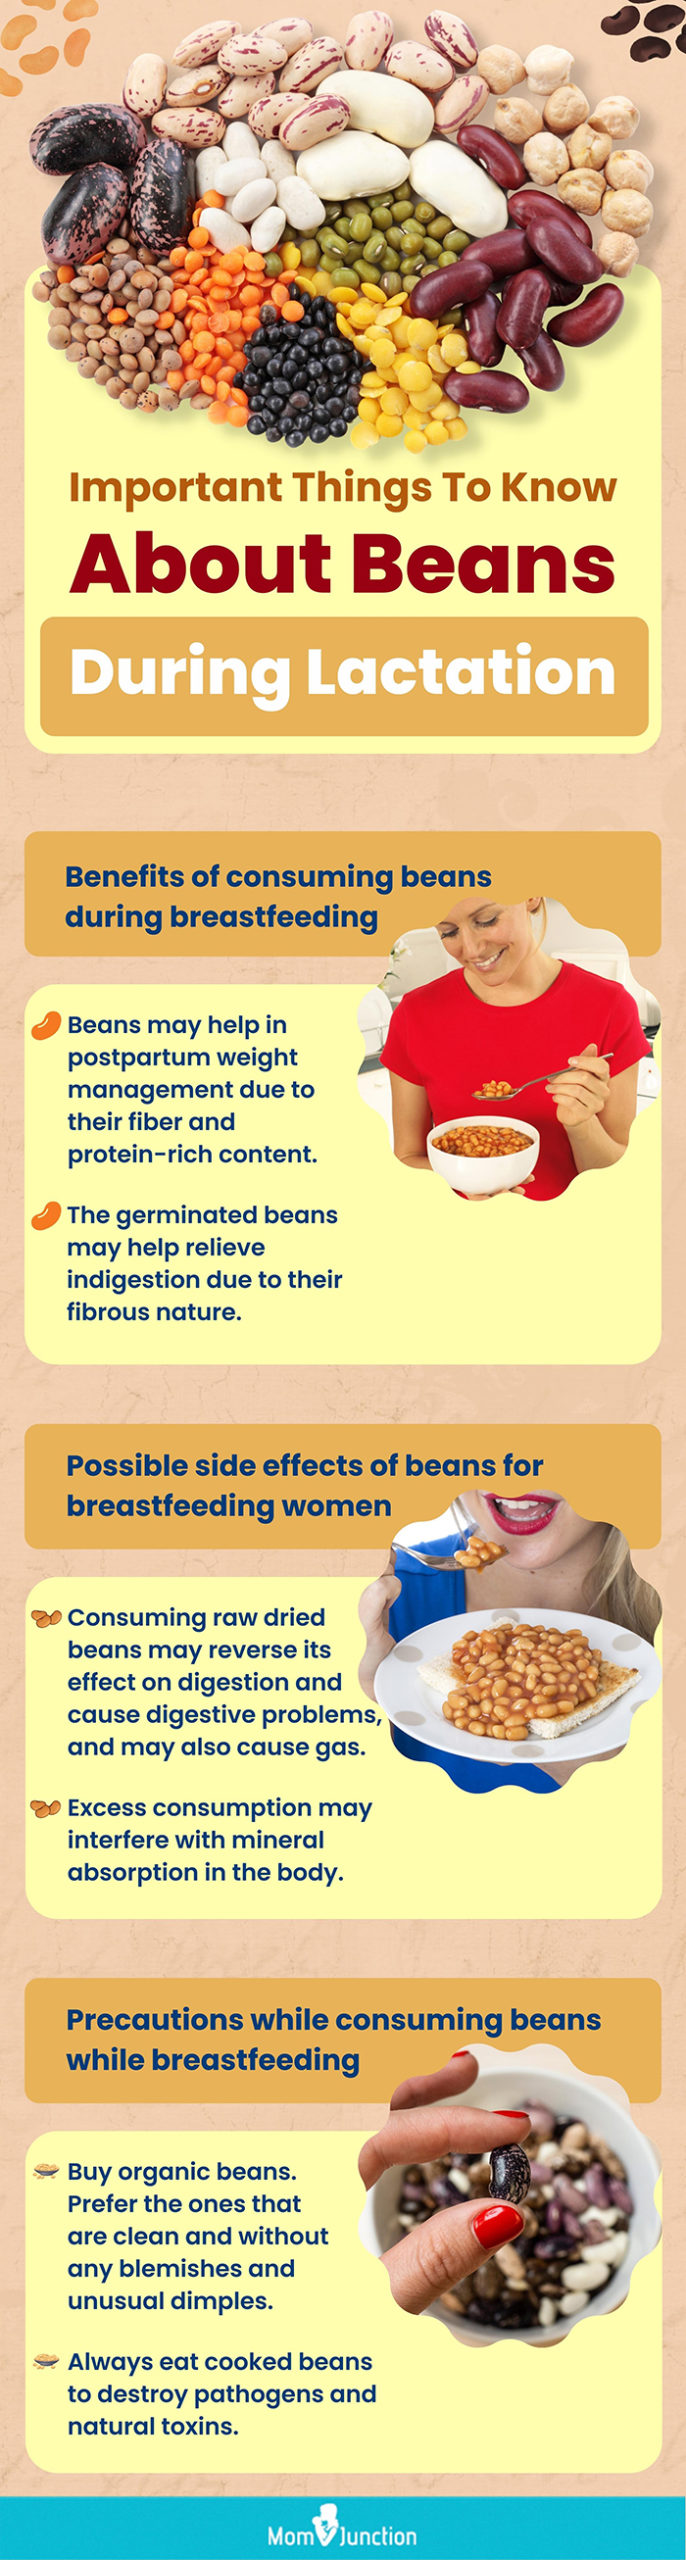 https://www.momjunction.com/wp-content/uploads/2022/11/Important-Things-To-Know-About-Beans-During-Lactation-Final-scaled.jpg